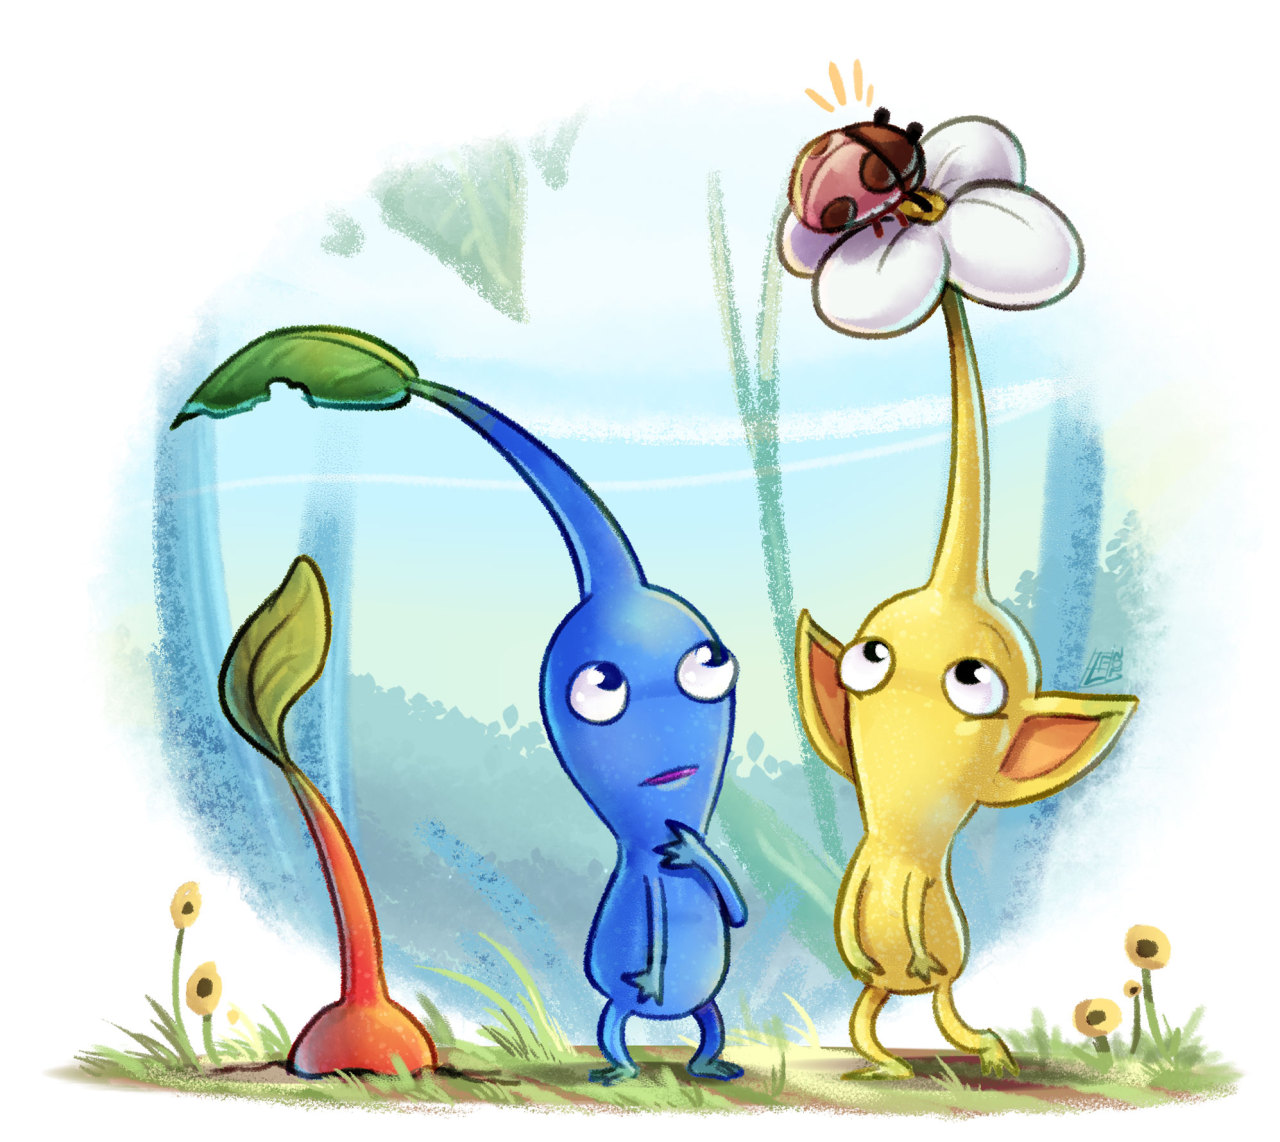 With Pikmin’s 20th anniversary and the release of Pikmin Bloom, I wanted to draw a little something.
Man, times flies so fast. Pikmin doesn’t have a lot of games, but they’re really good ones.
Pikmin © Nintendo
Artwork made by me.